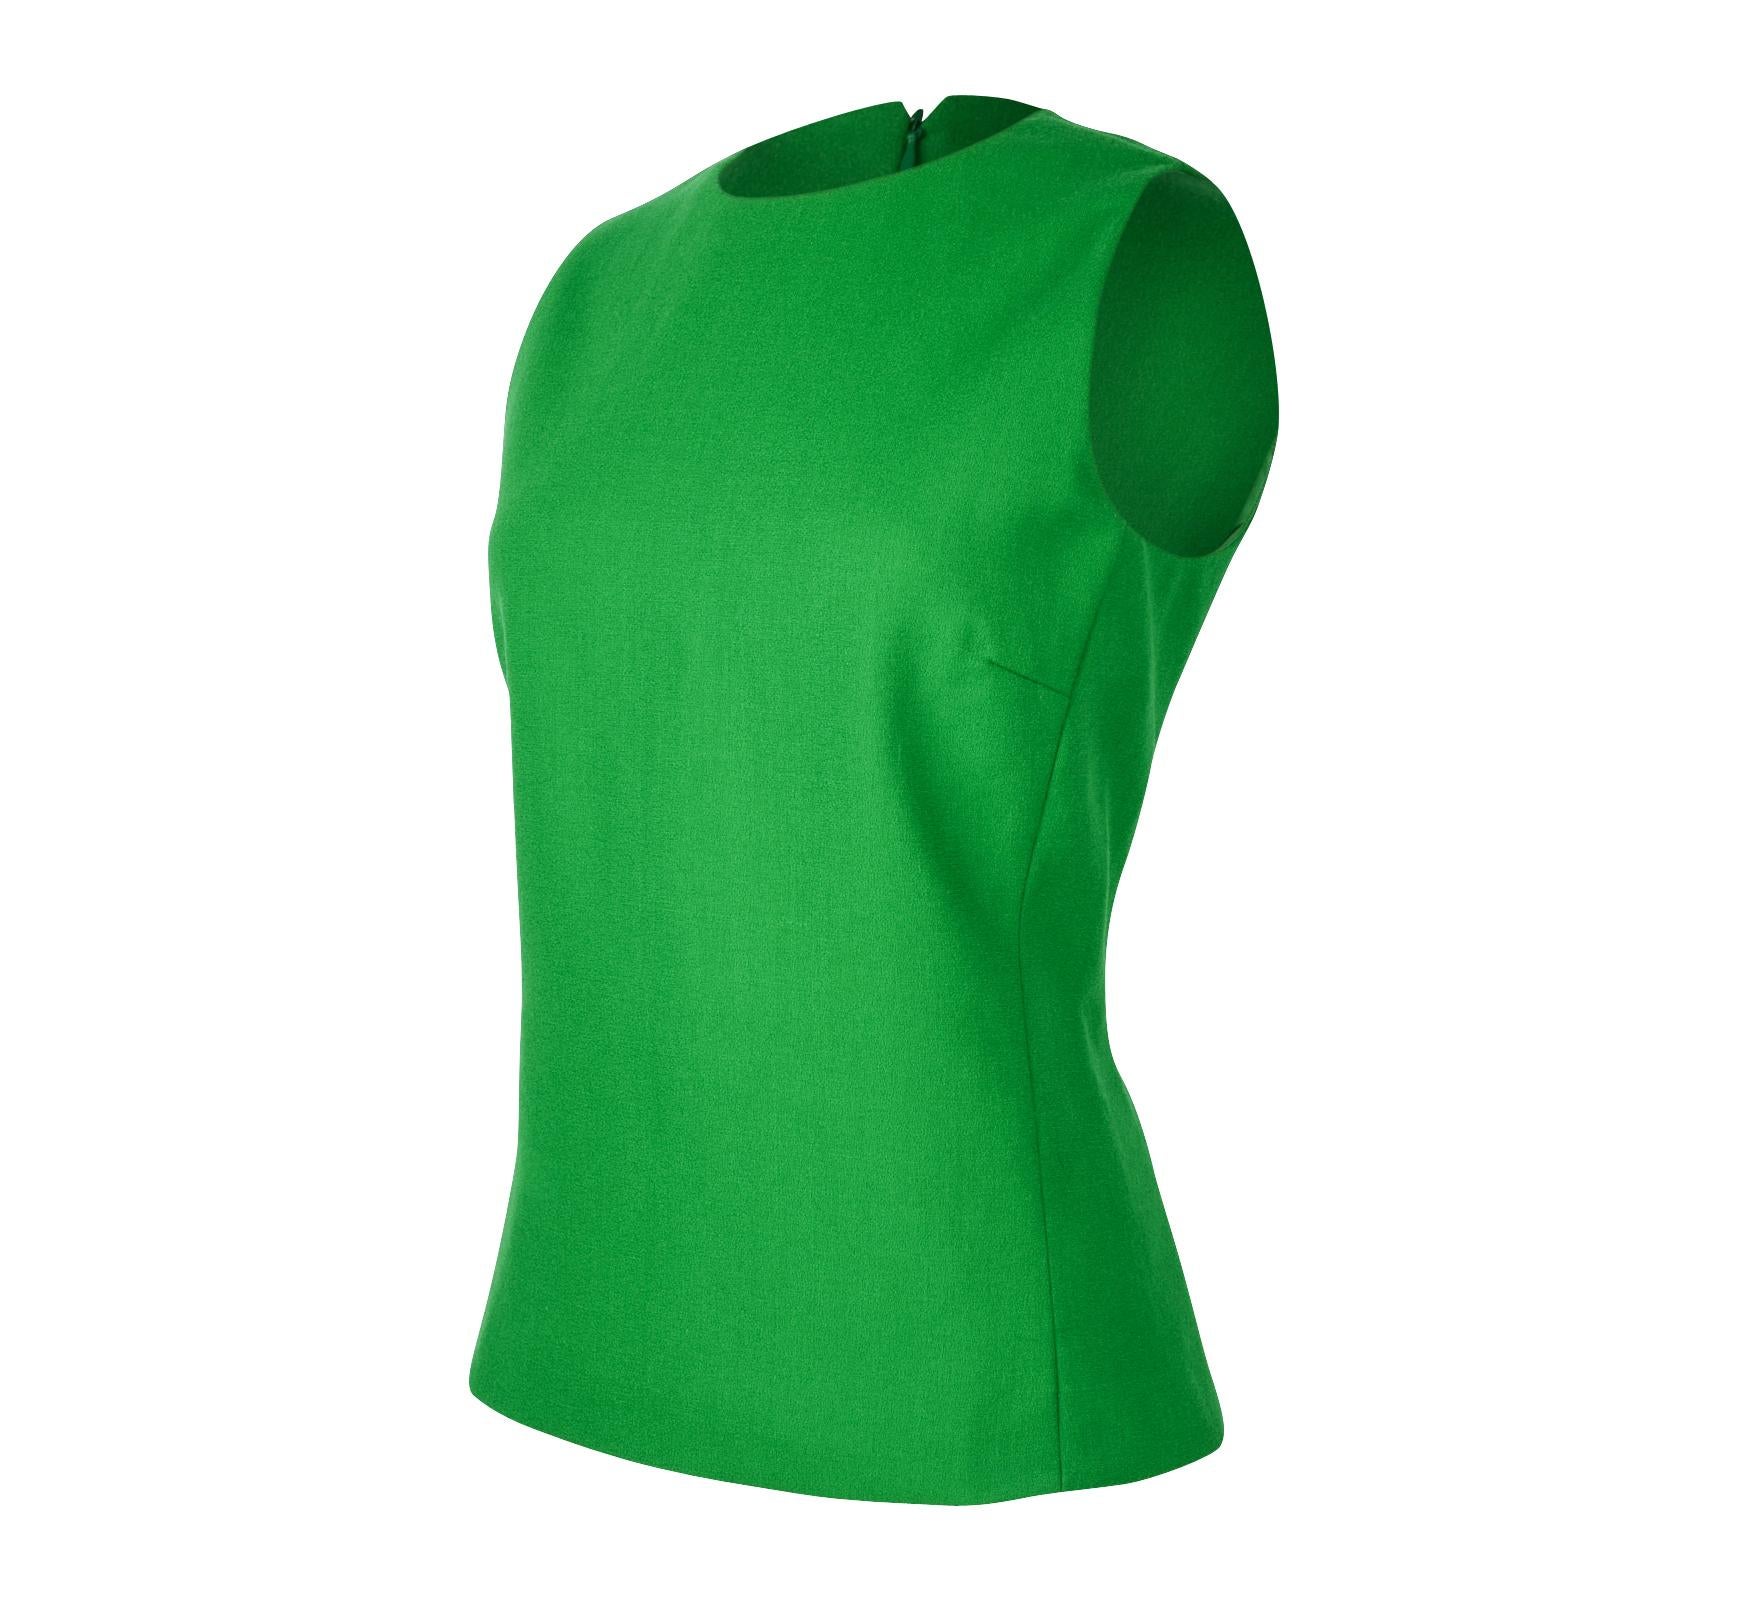 Guaranteed authentic Christian Dior emerald green sleeveless top. 
Shaped in a tunic style with jewel neckline and hidden rear zip.
No fabric or size tag.
final sale

SIZE fits 8

TOP MEASURES: 
LENGTH  24.5